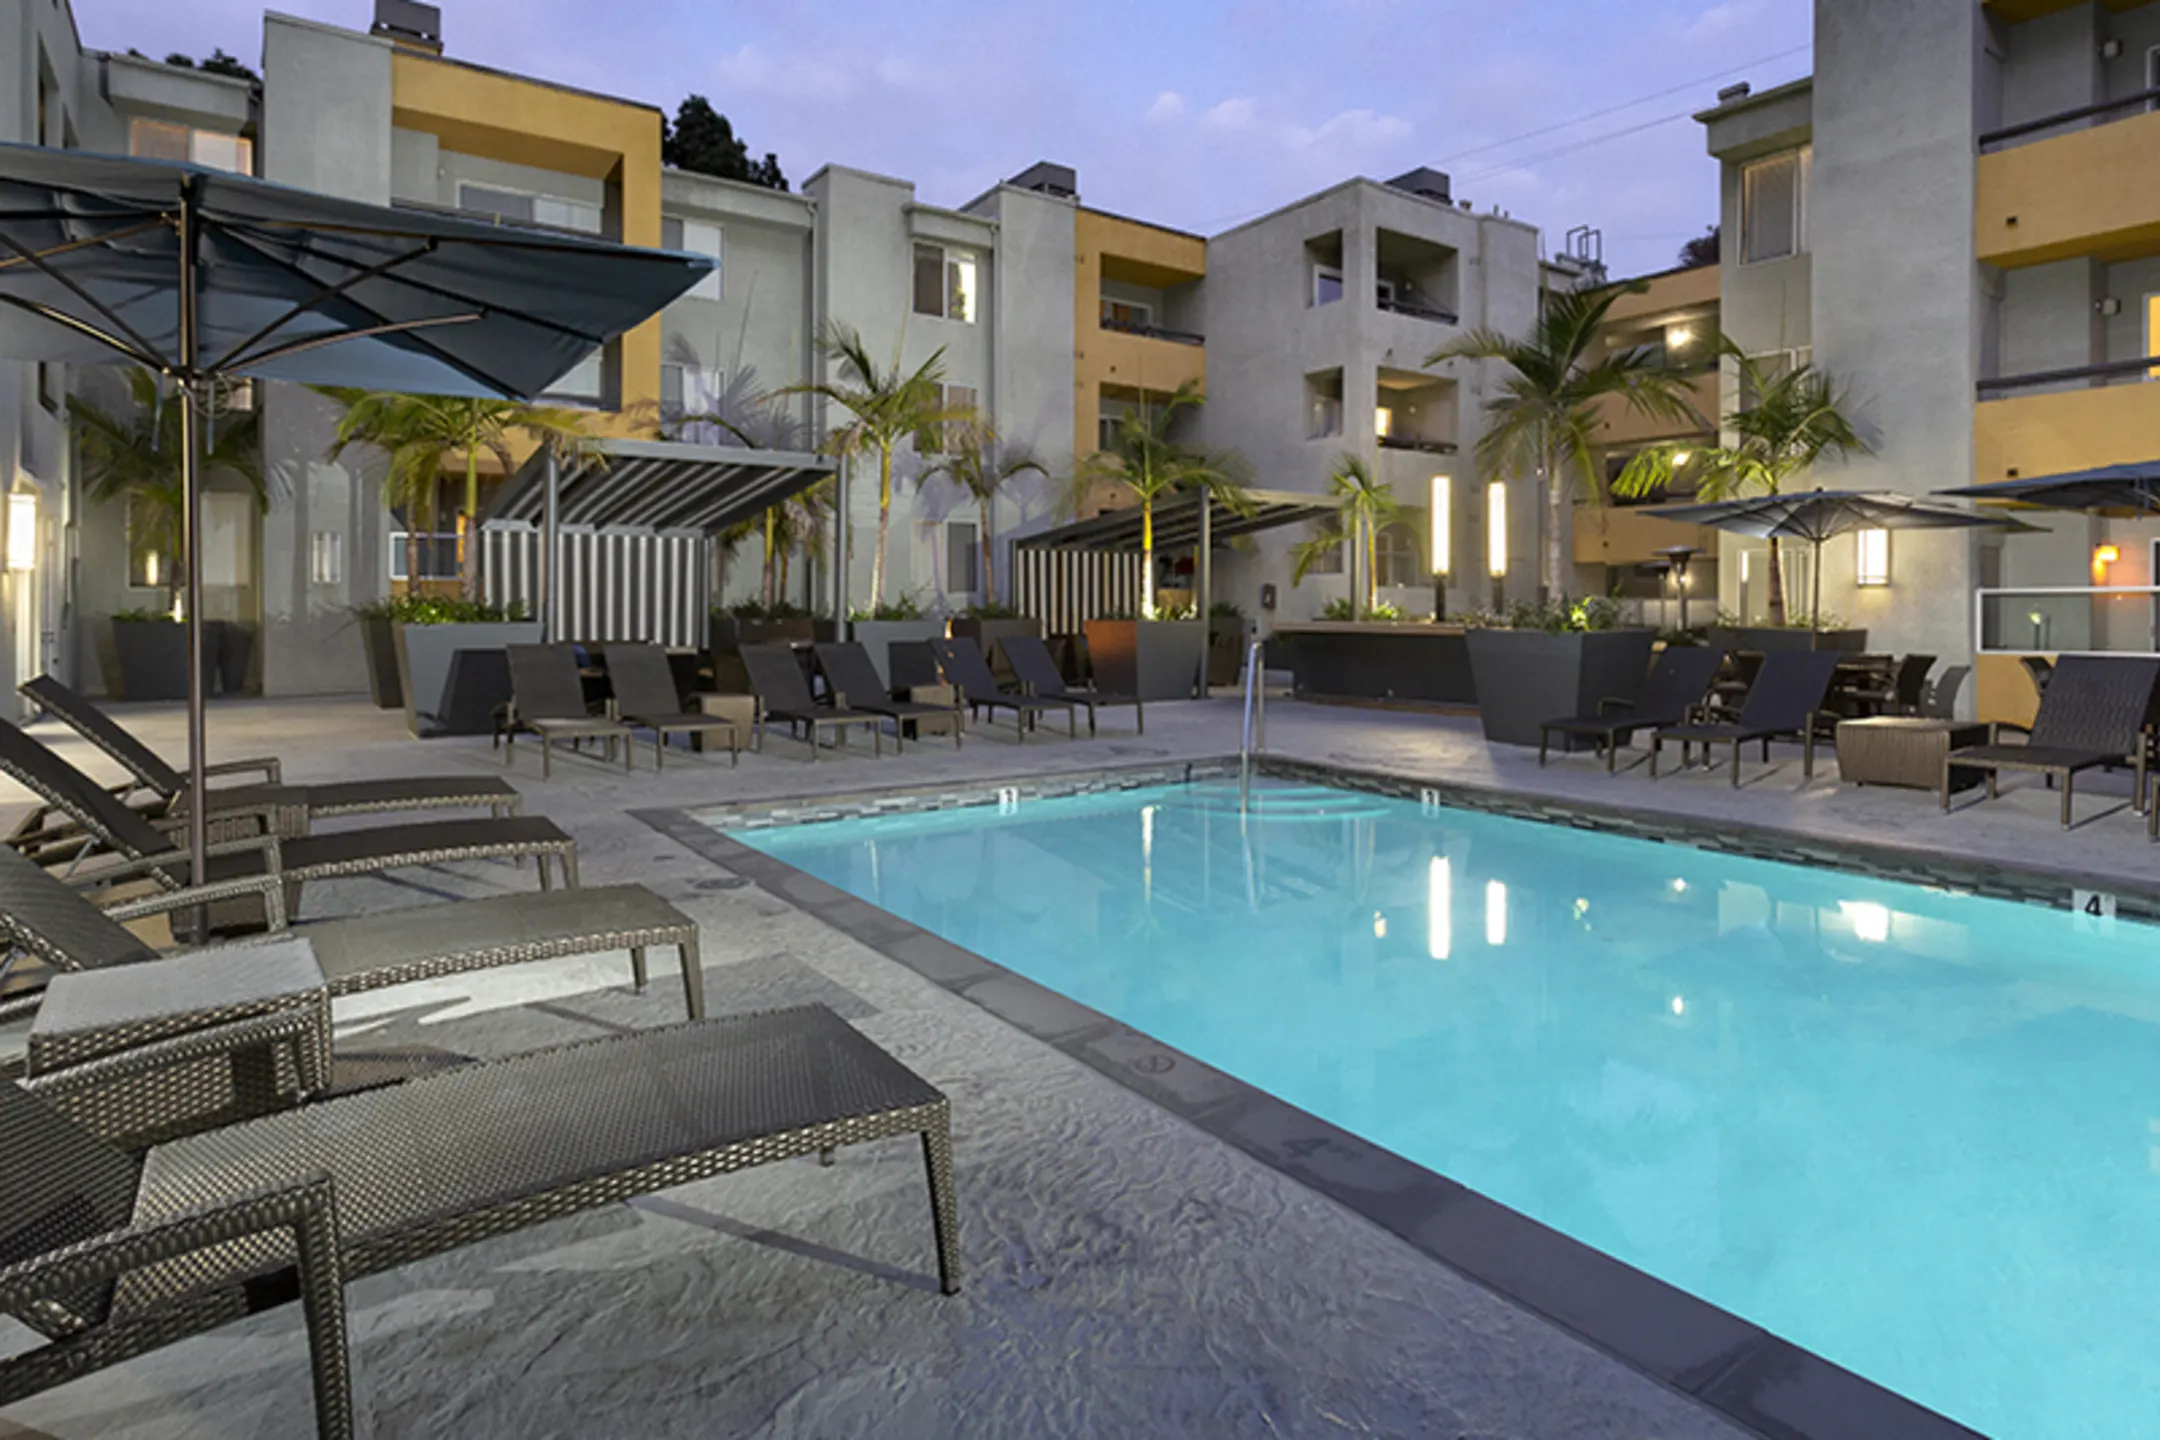 Pool - The Crescent at West Hollywood - West Hollywood, CA